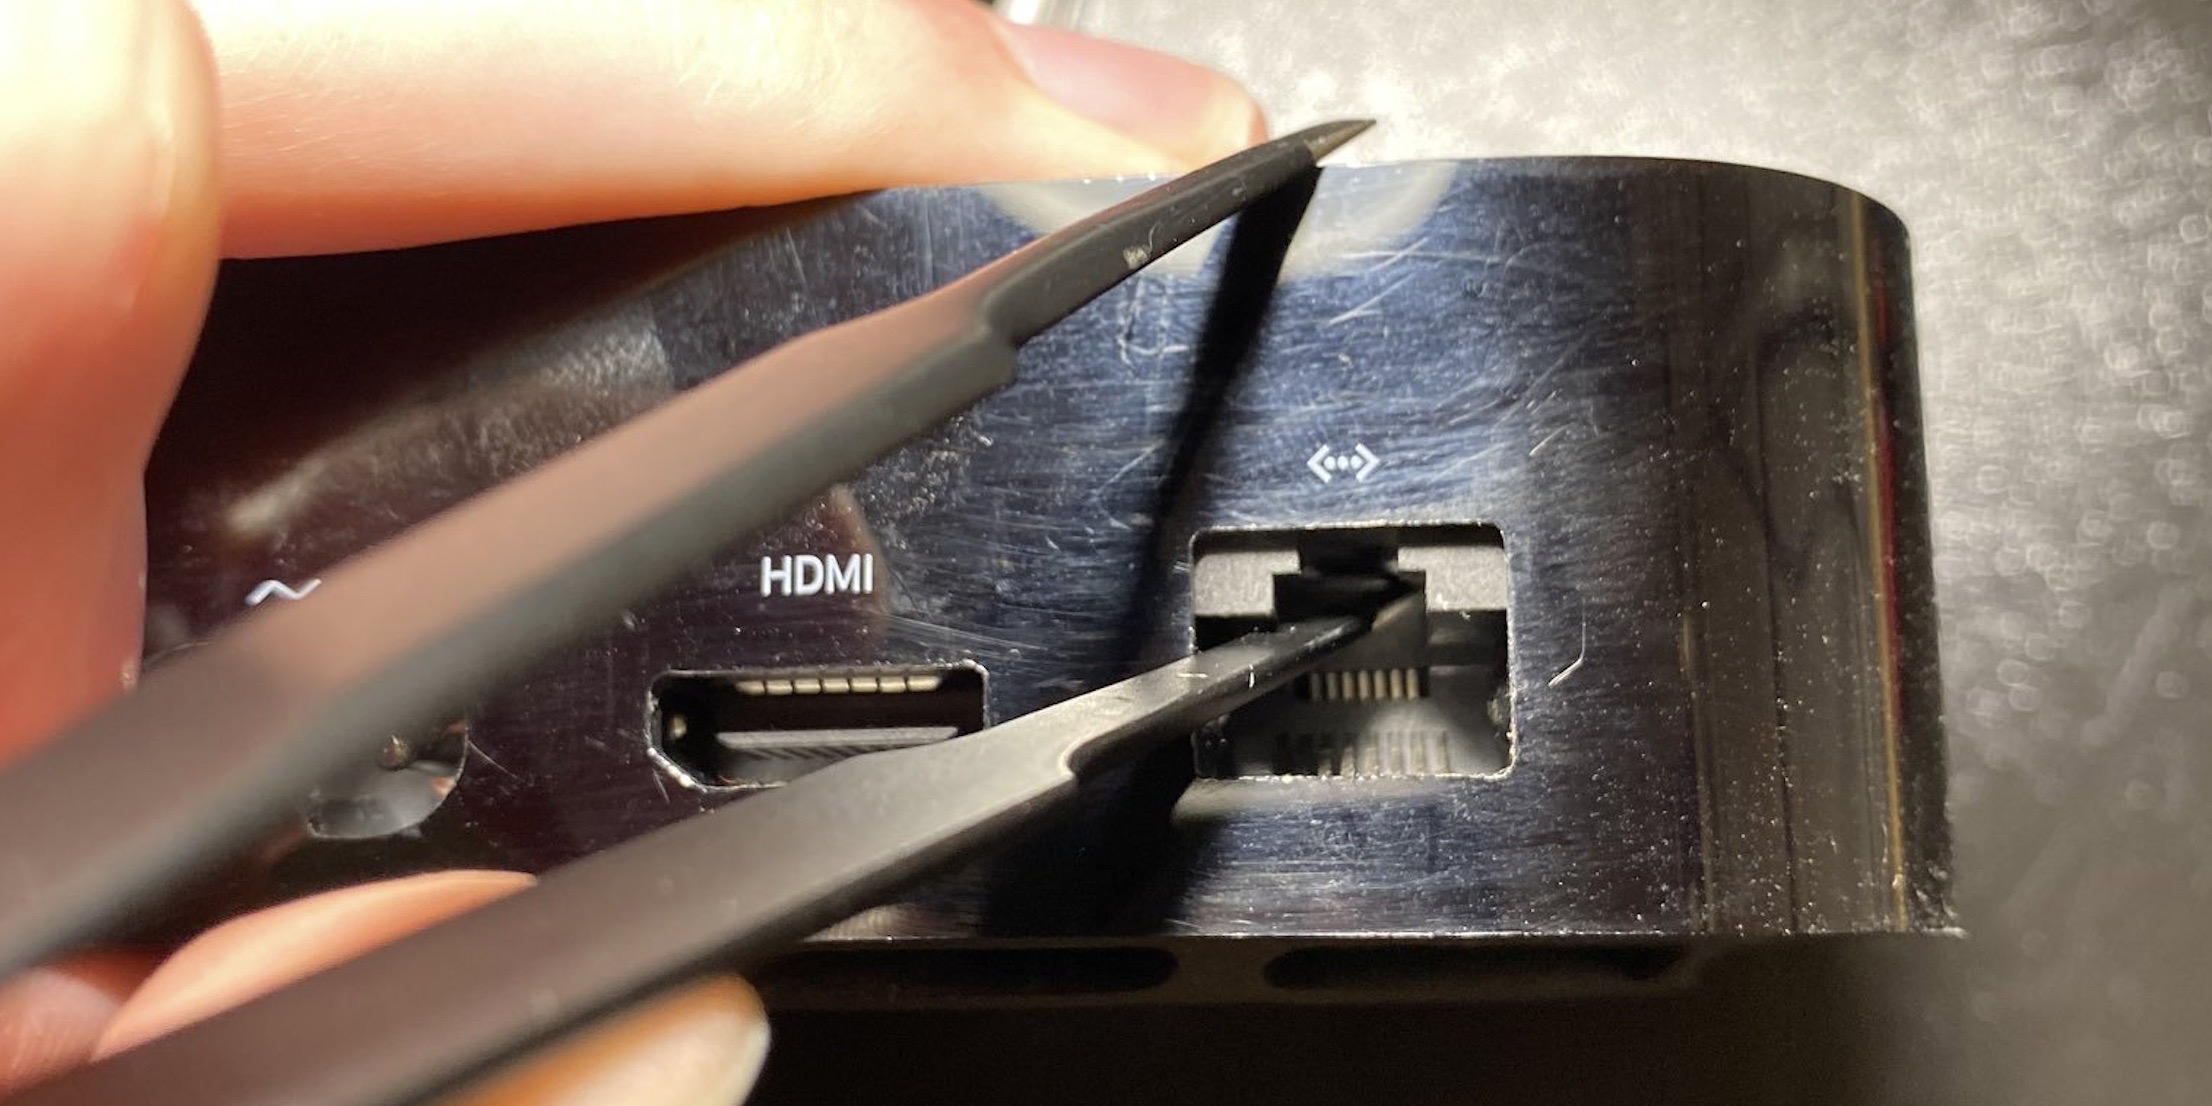 Apple hid a Lightning connector for debugging in the Apple 4K's port -